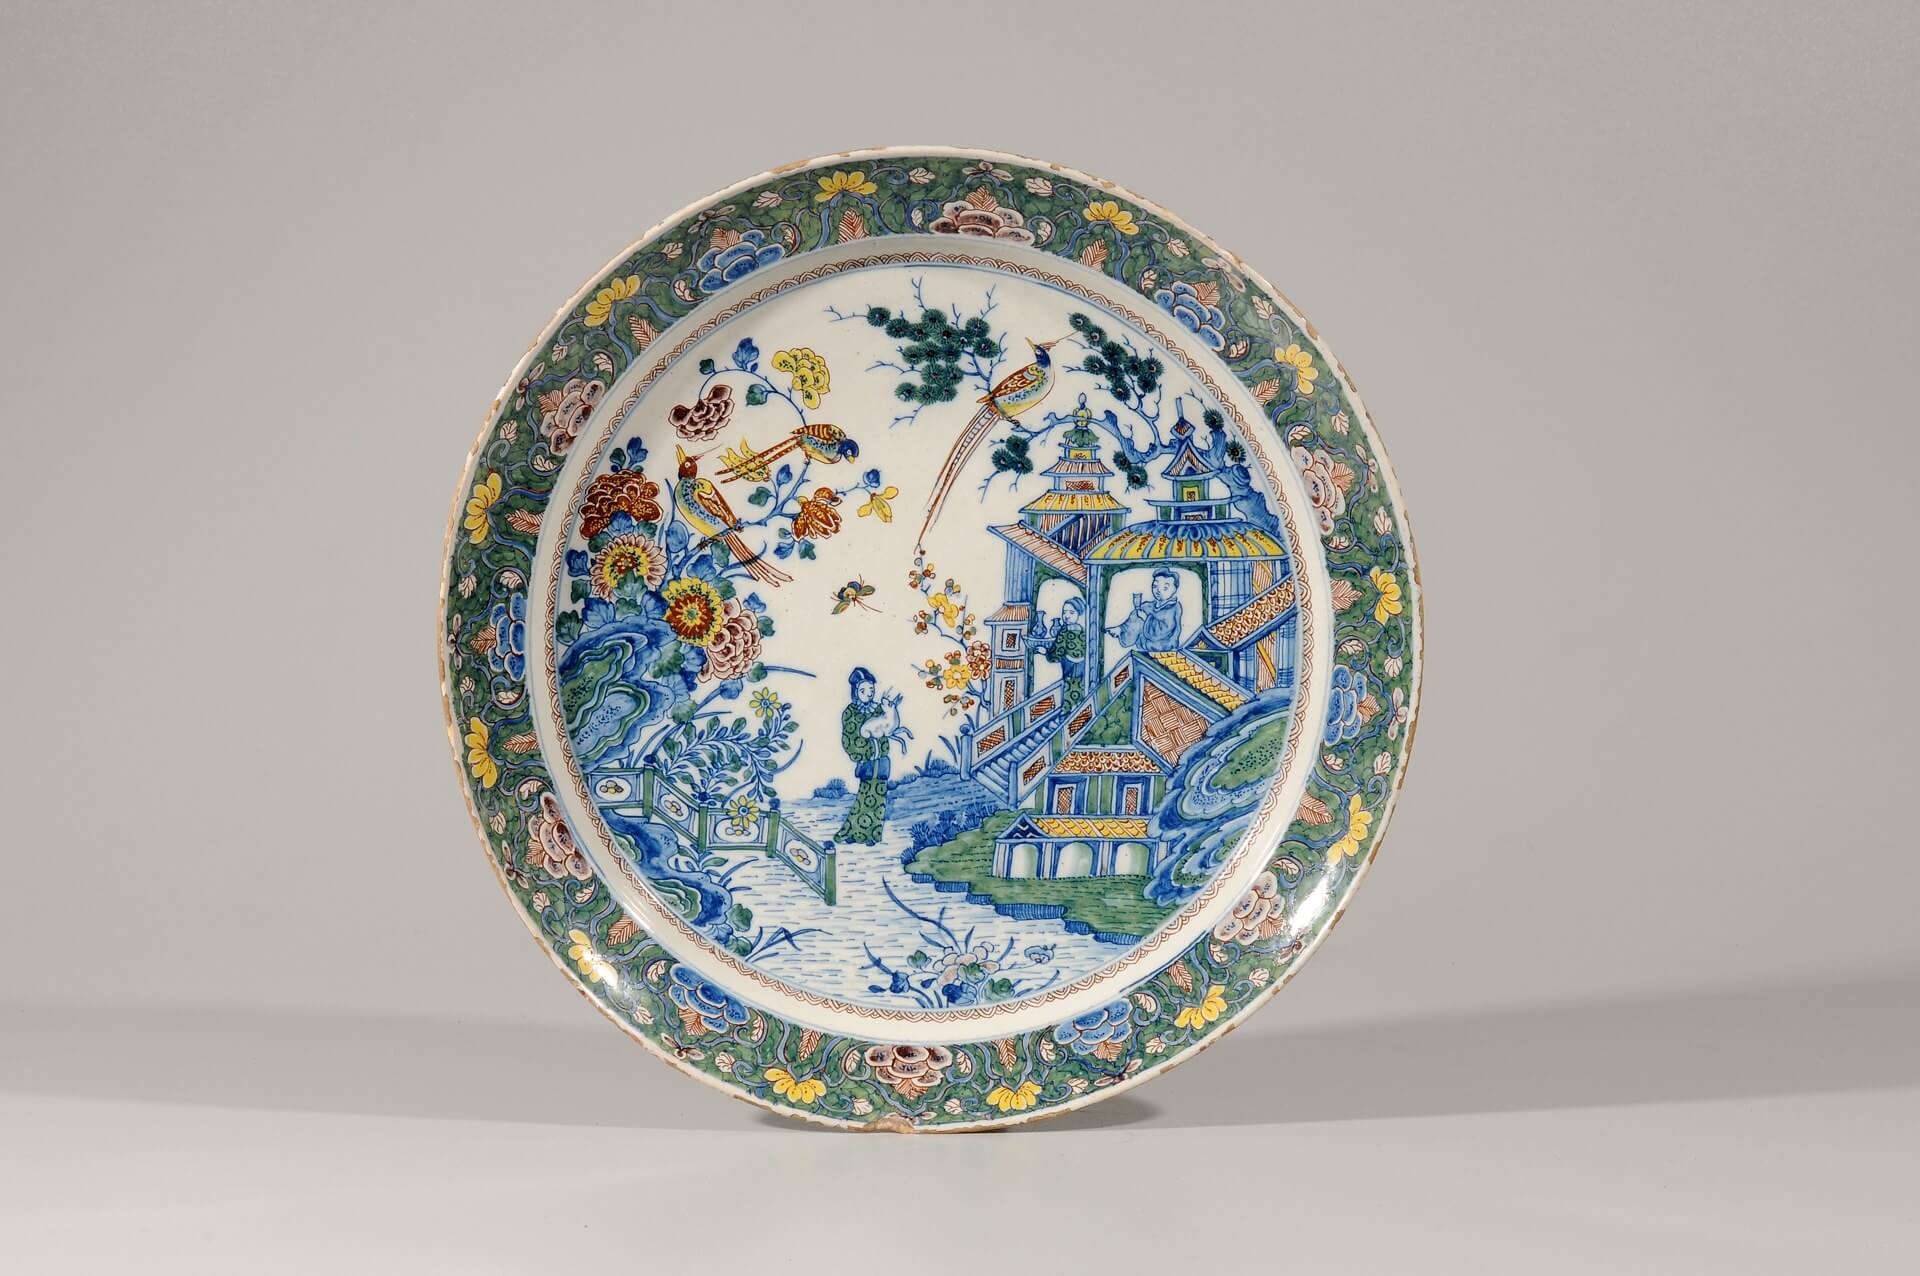 Antique pottery of chinoiserie plate at Aronson Antiquairs